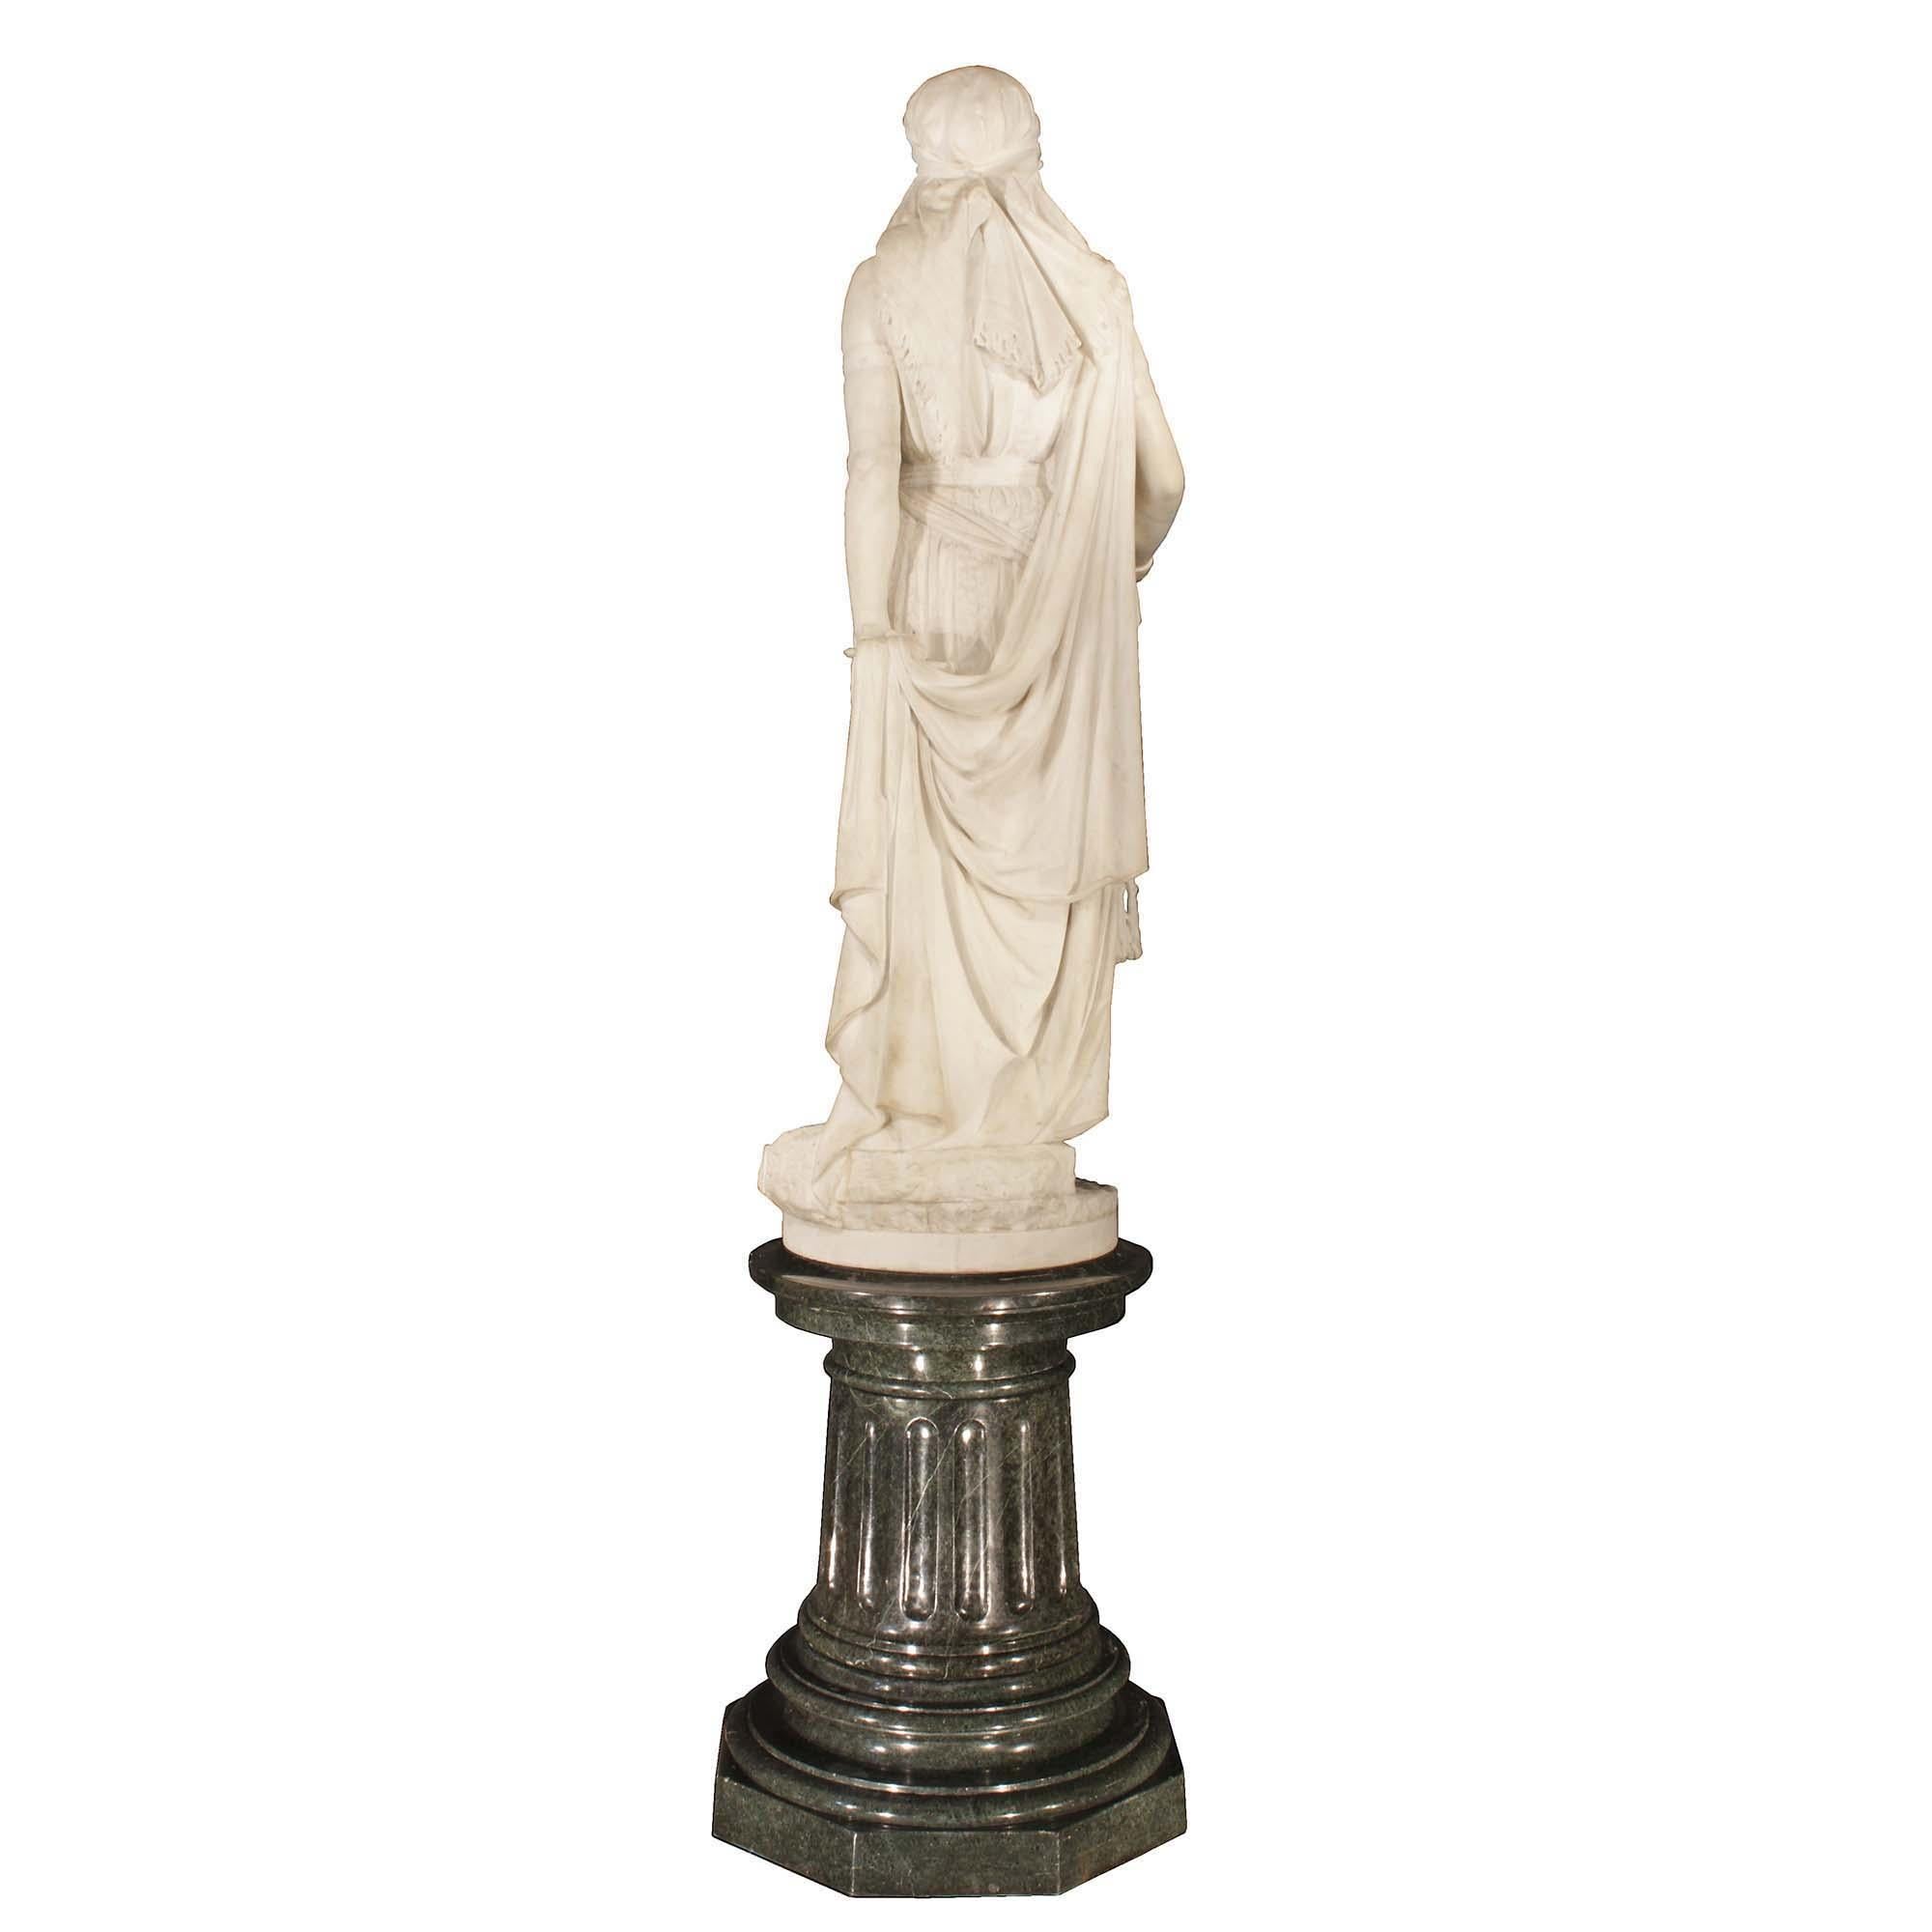 A very impressive and important Italian 19th century solid white Carrera marble statue of Jael, signed Guglielmo Baldi. The statue is raised on a Vert Antique marble base. The statue is finely executed with wonderful details and expression, and Jael